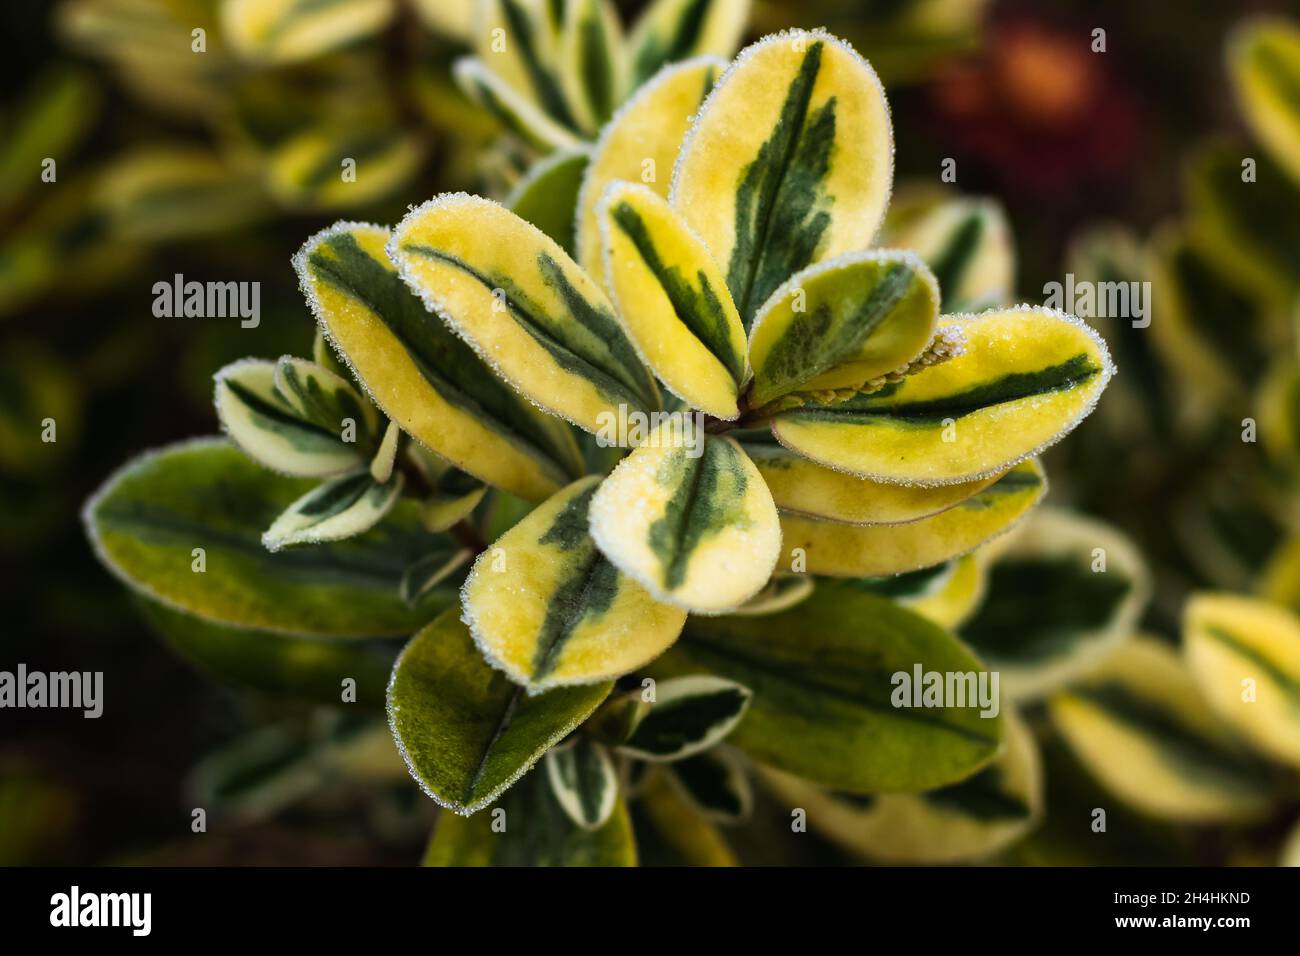 Closeup of Euonymus japonicus, species of flowering plant in the family Celastraceae. Stock Photo